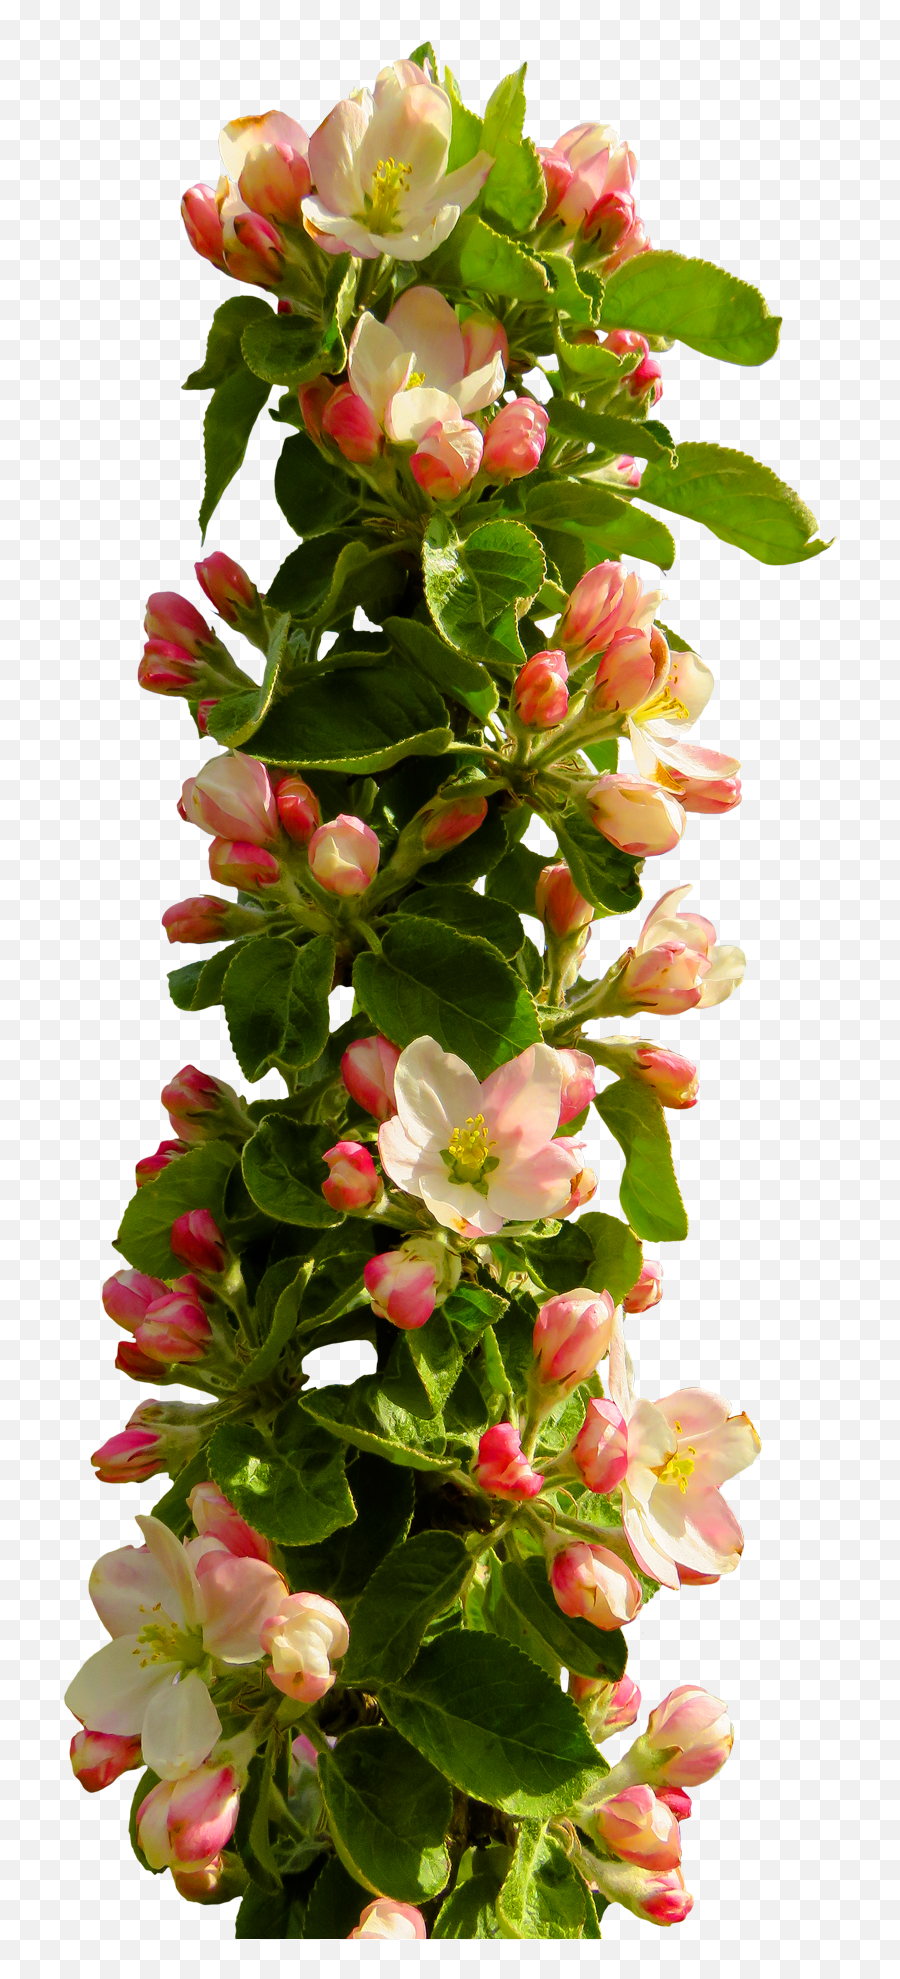 Flowers Png Images Hd Png Image With No - Flowers Png Images Hd Emoji,Flower Png